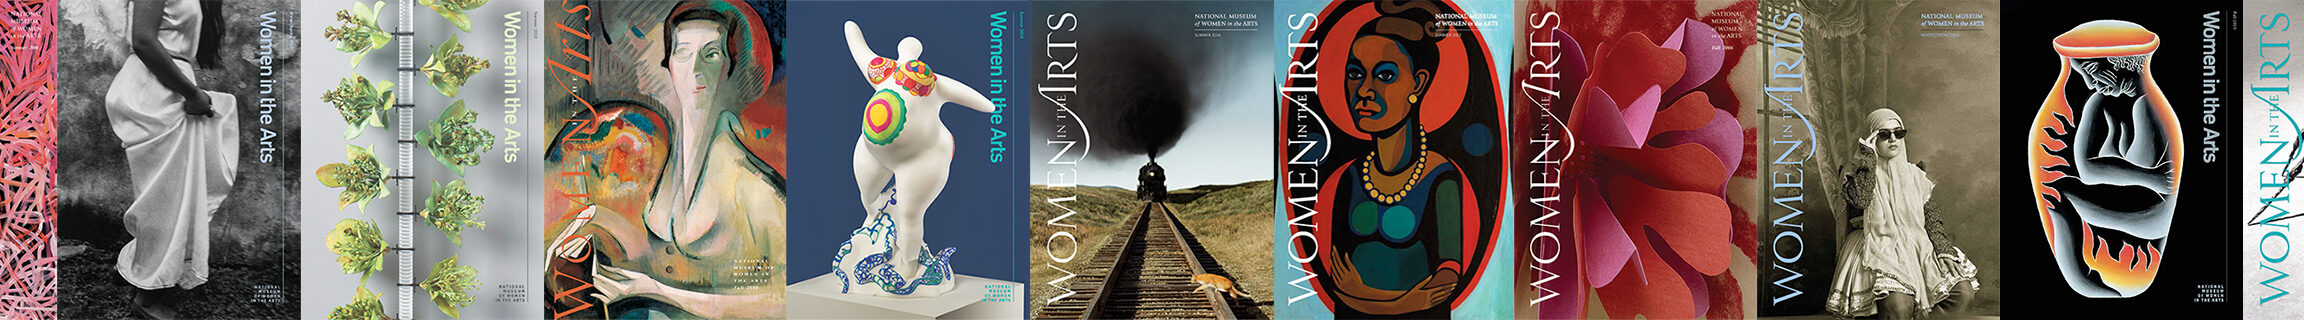 Side-by-side composition of multiple magazine covers published by the museum. All covers have a featured image followed by the text, 'Women in the Arts.'